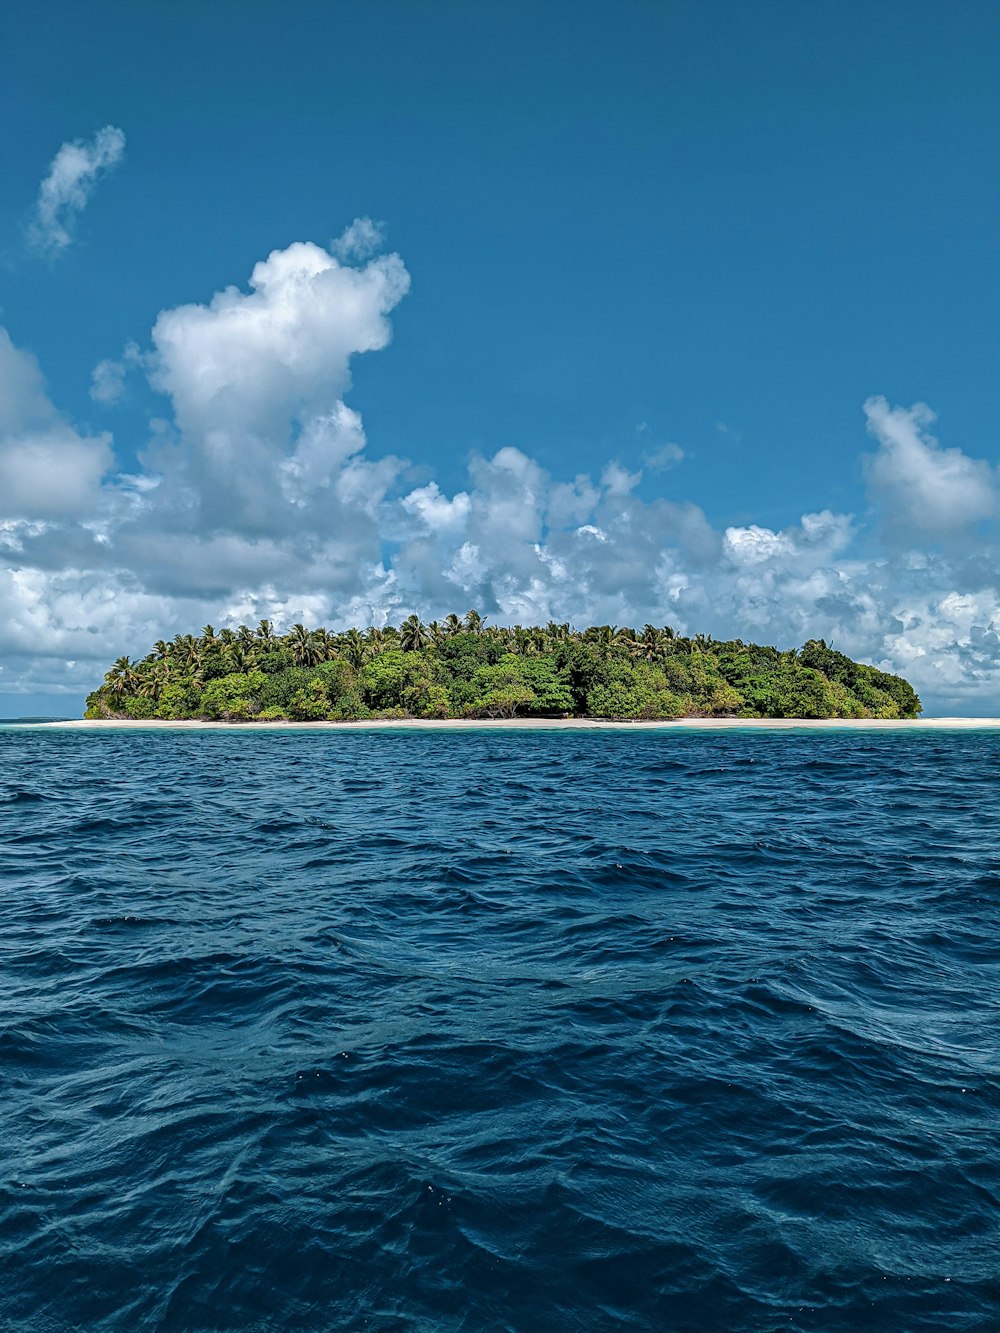 green island surrounded by blue sea under blue and white cloudy sky during daytime